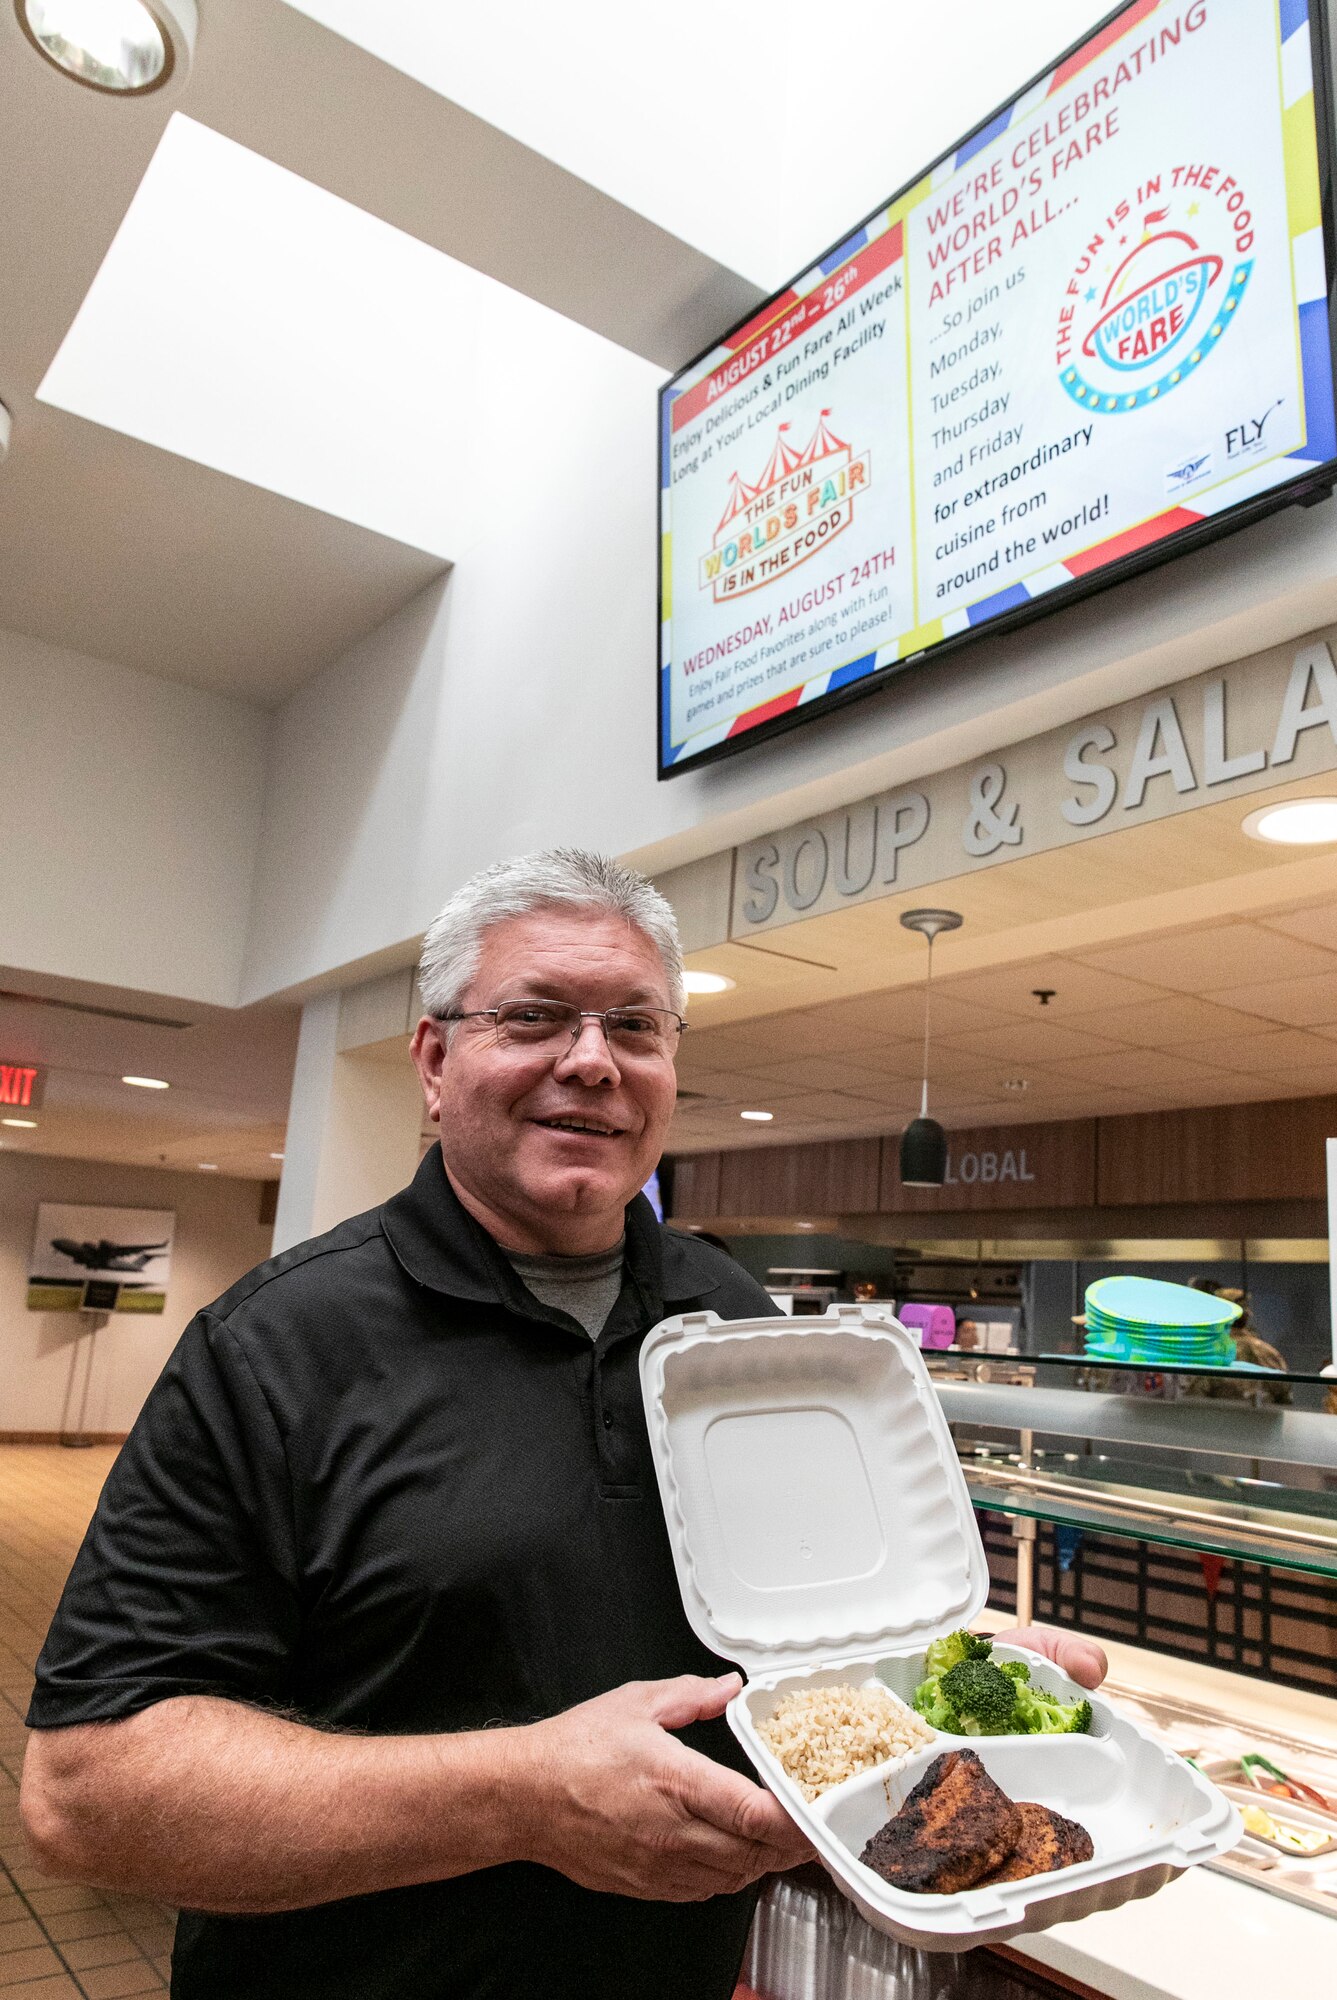 Dave Johnson, 436th Airlift Wing inspector general complaints resolution director, displays his German inspired cuisine in a to-go container at the Patterson Dining Facility on Dover Air Force Base, Delaware, Aug. 25, 2022. Each day during the week of Aug. 22-26, personnel assigned to the 436th Force Support Squadron dining facility prepared food from different regions of the world for lunch to promote diversity during National Foreign Language Observation week. (U.S. Air Force photo by Roland Balik)